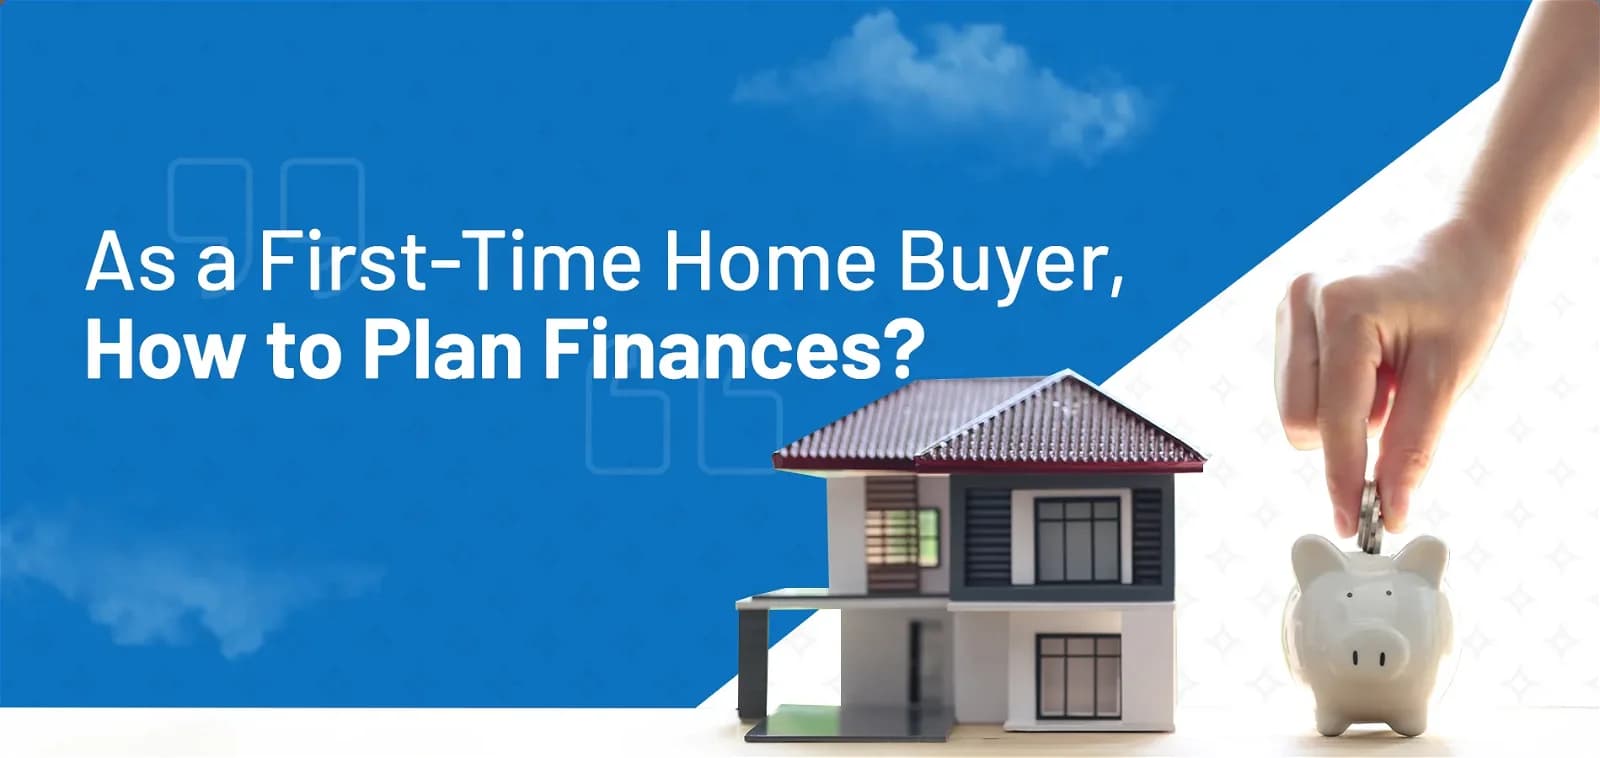 As a First-Time Home Buyer, How to Plan Finances?